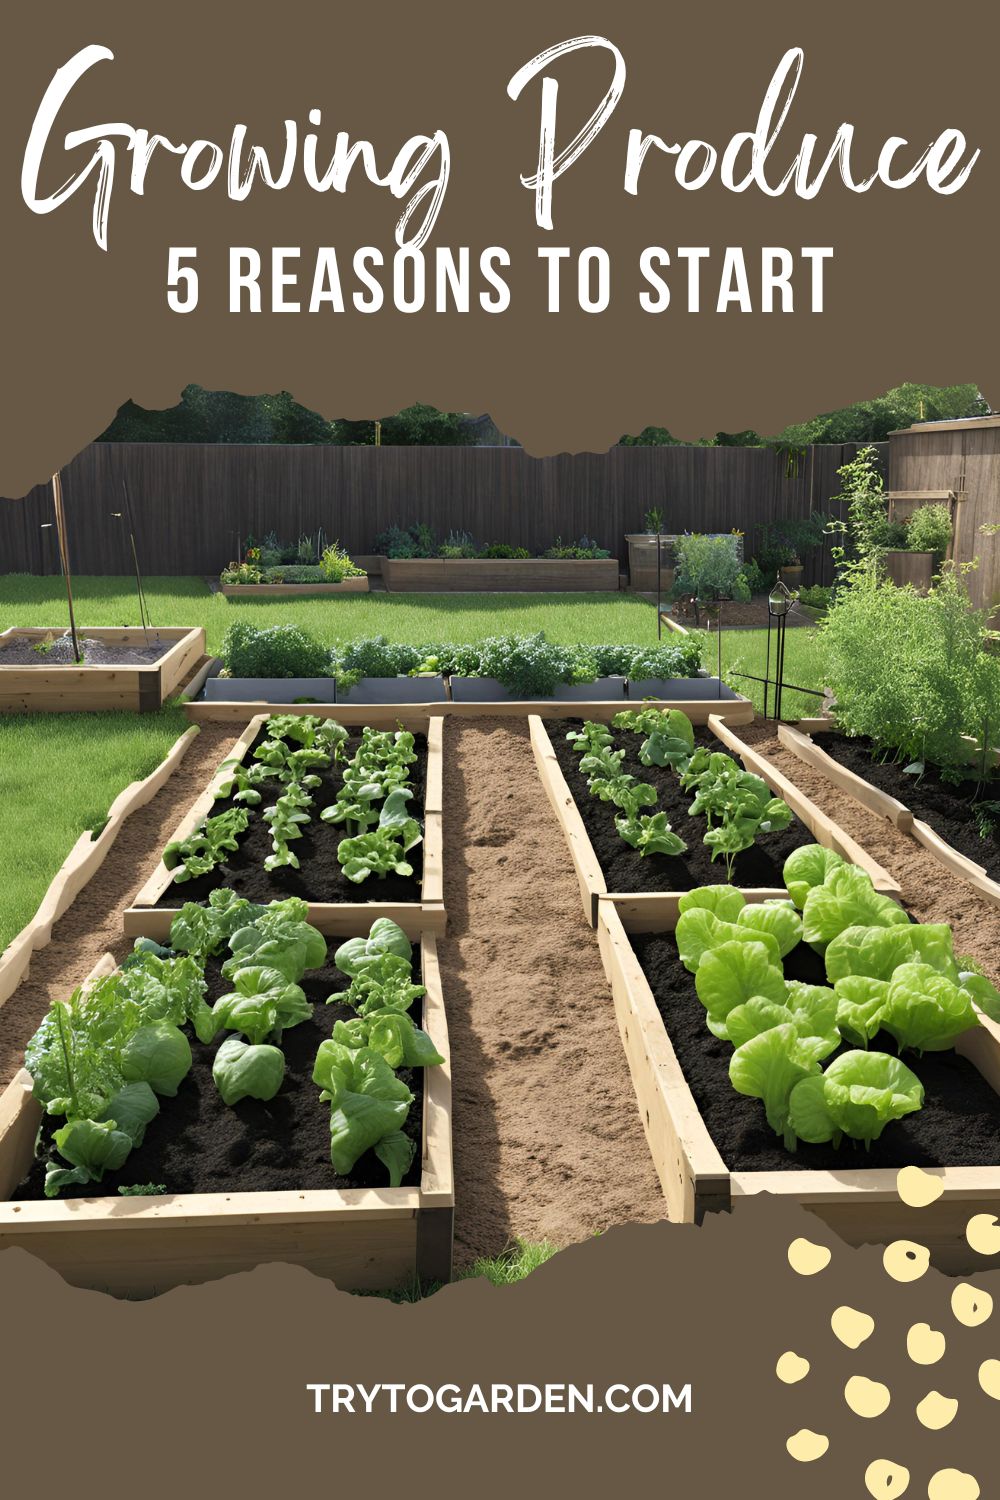 Growing your own fruits and vegetables can be beneficial to your family in countless ways, here I am going to address just a few reasons to grow your own produce.